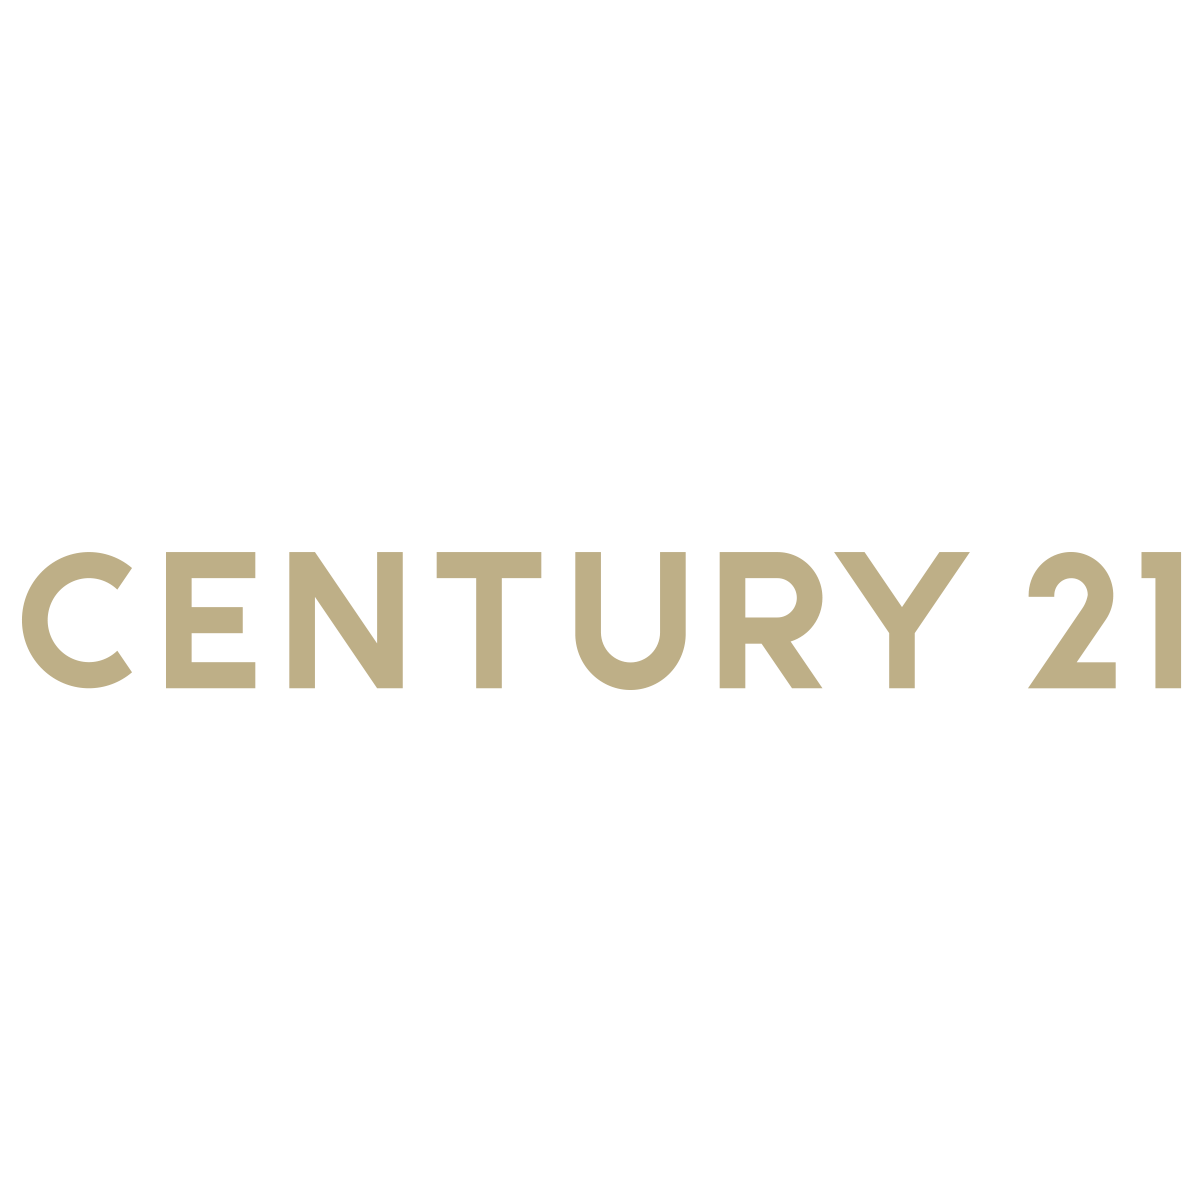 Ra Si Mar - Lic. Real Estate Salesperson at Century 21 One Realty